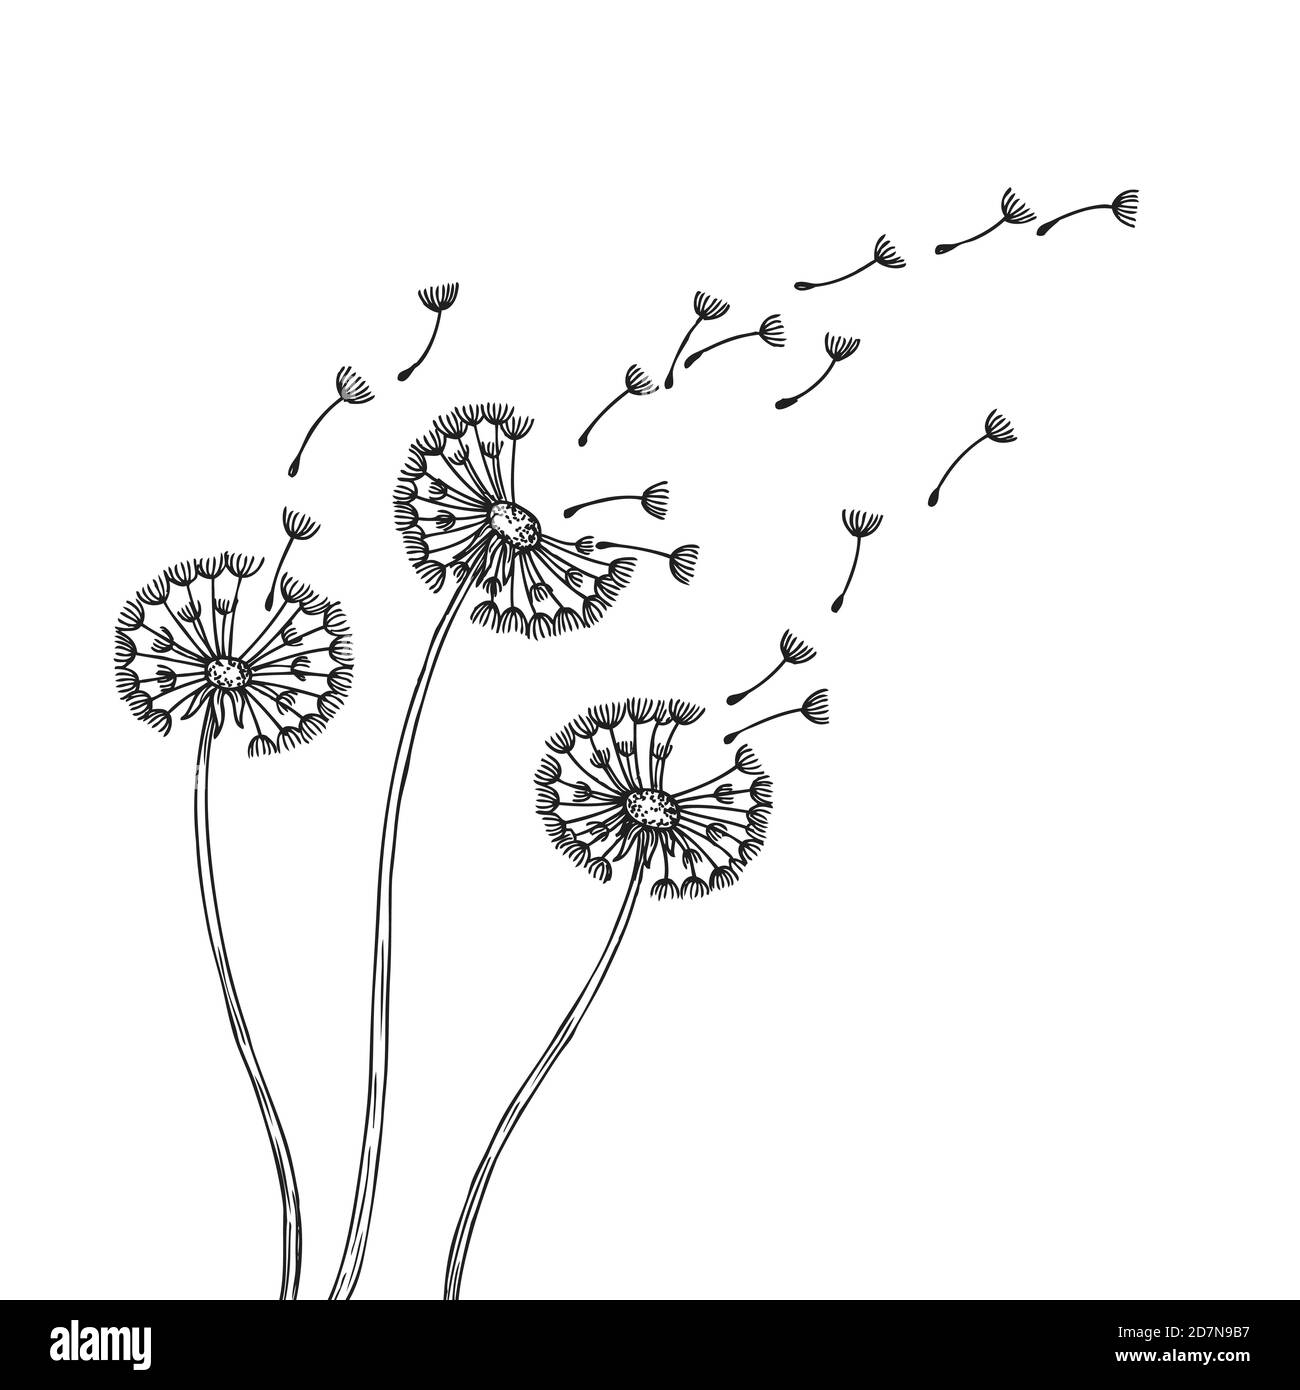 Dandelion silhouettes. Dandelions grass pollen delicate plant seeds blowing wind fluff flower abstract vector spring graphics. Illustration of fluff dandelion, blossom flora Stock Vector